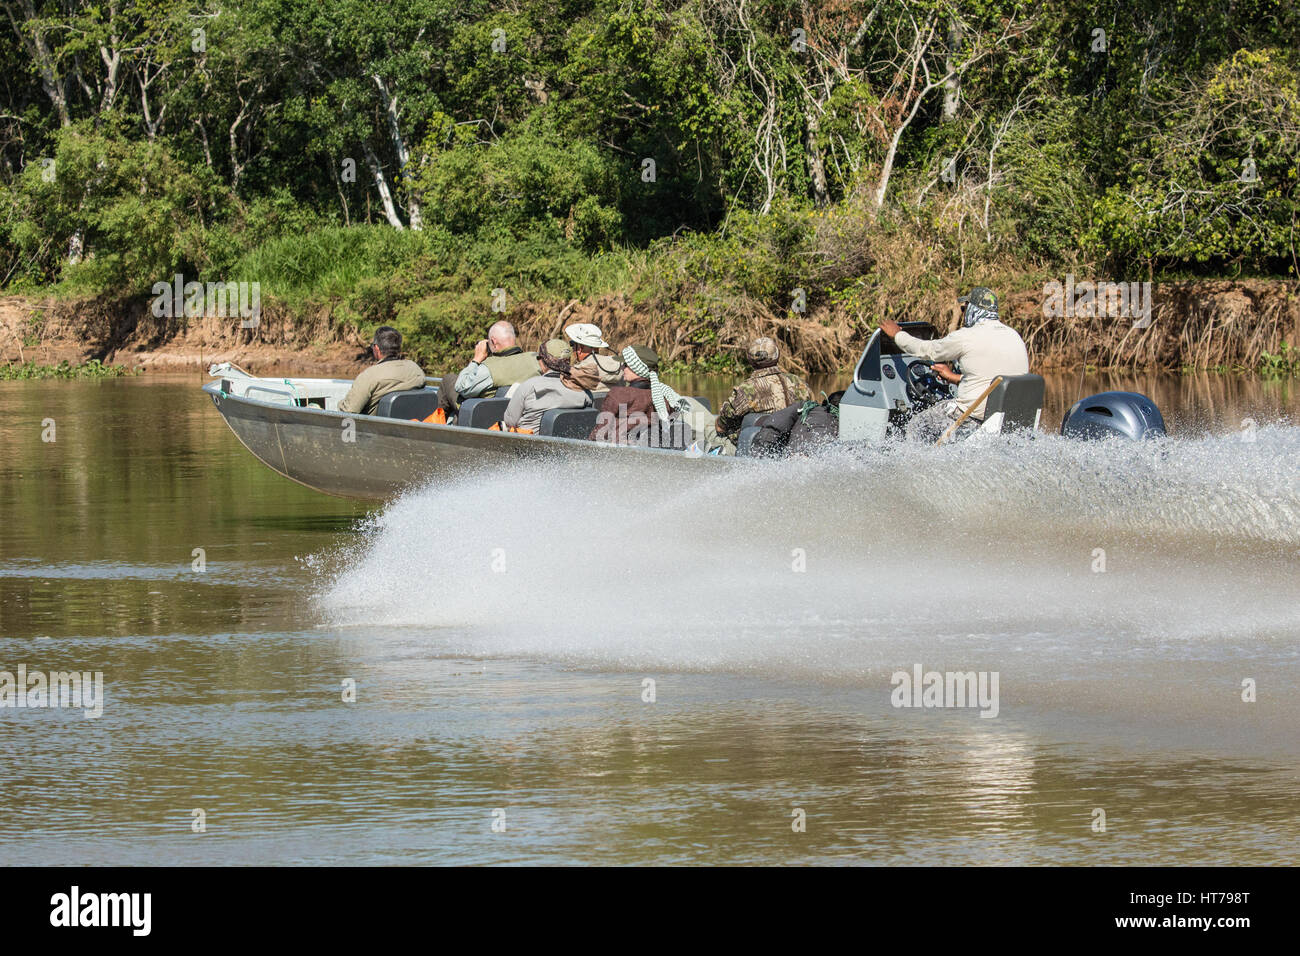 Boat full of tourists racing off to a new report of a jaguar, on the Cuiaba river, in the Pantanal region of Mato Grosso, Brazil, South America.  Boat Stock Photo